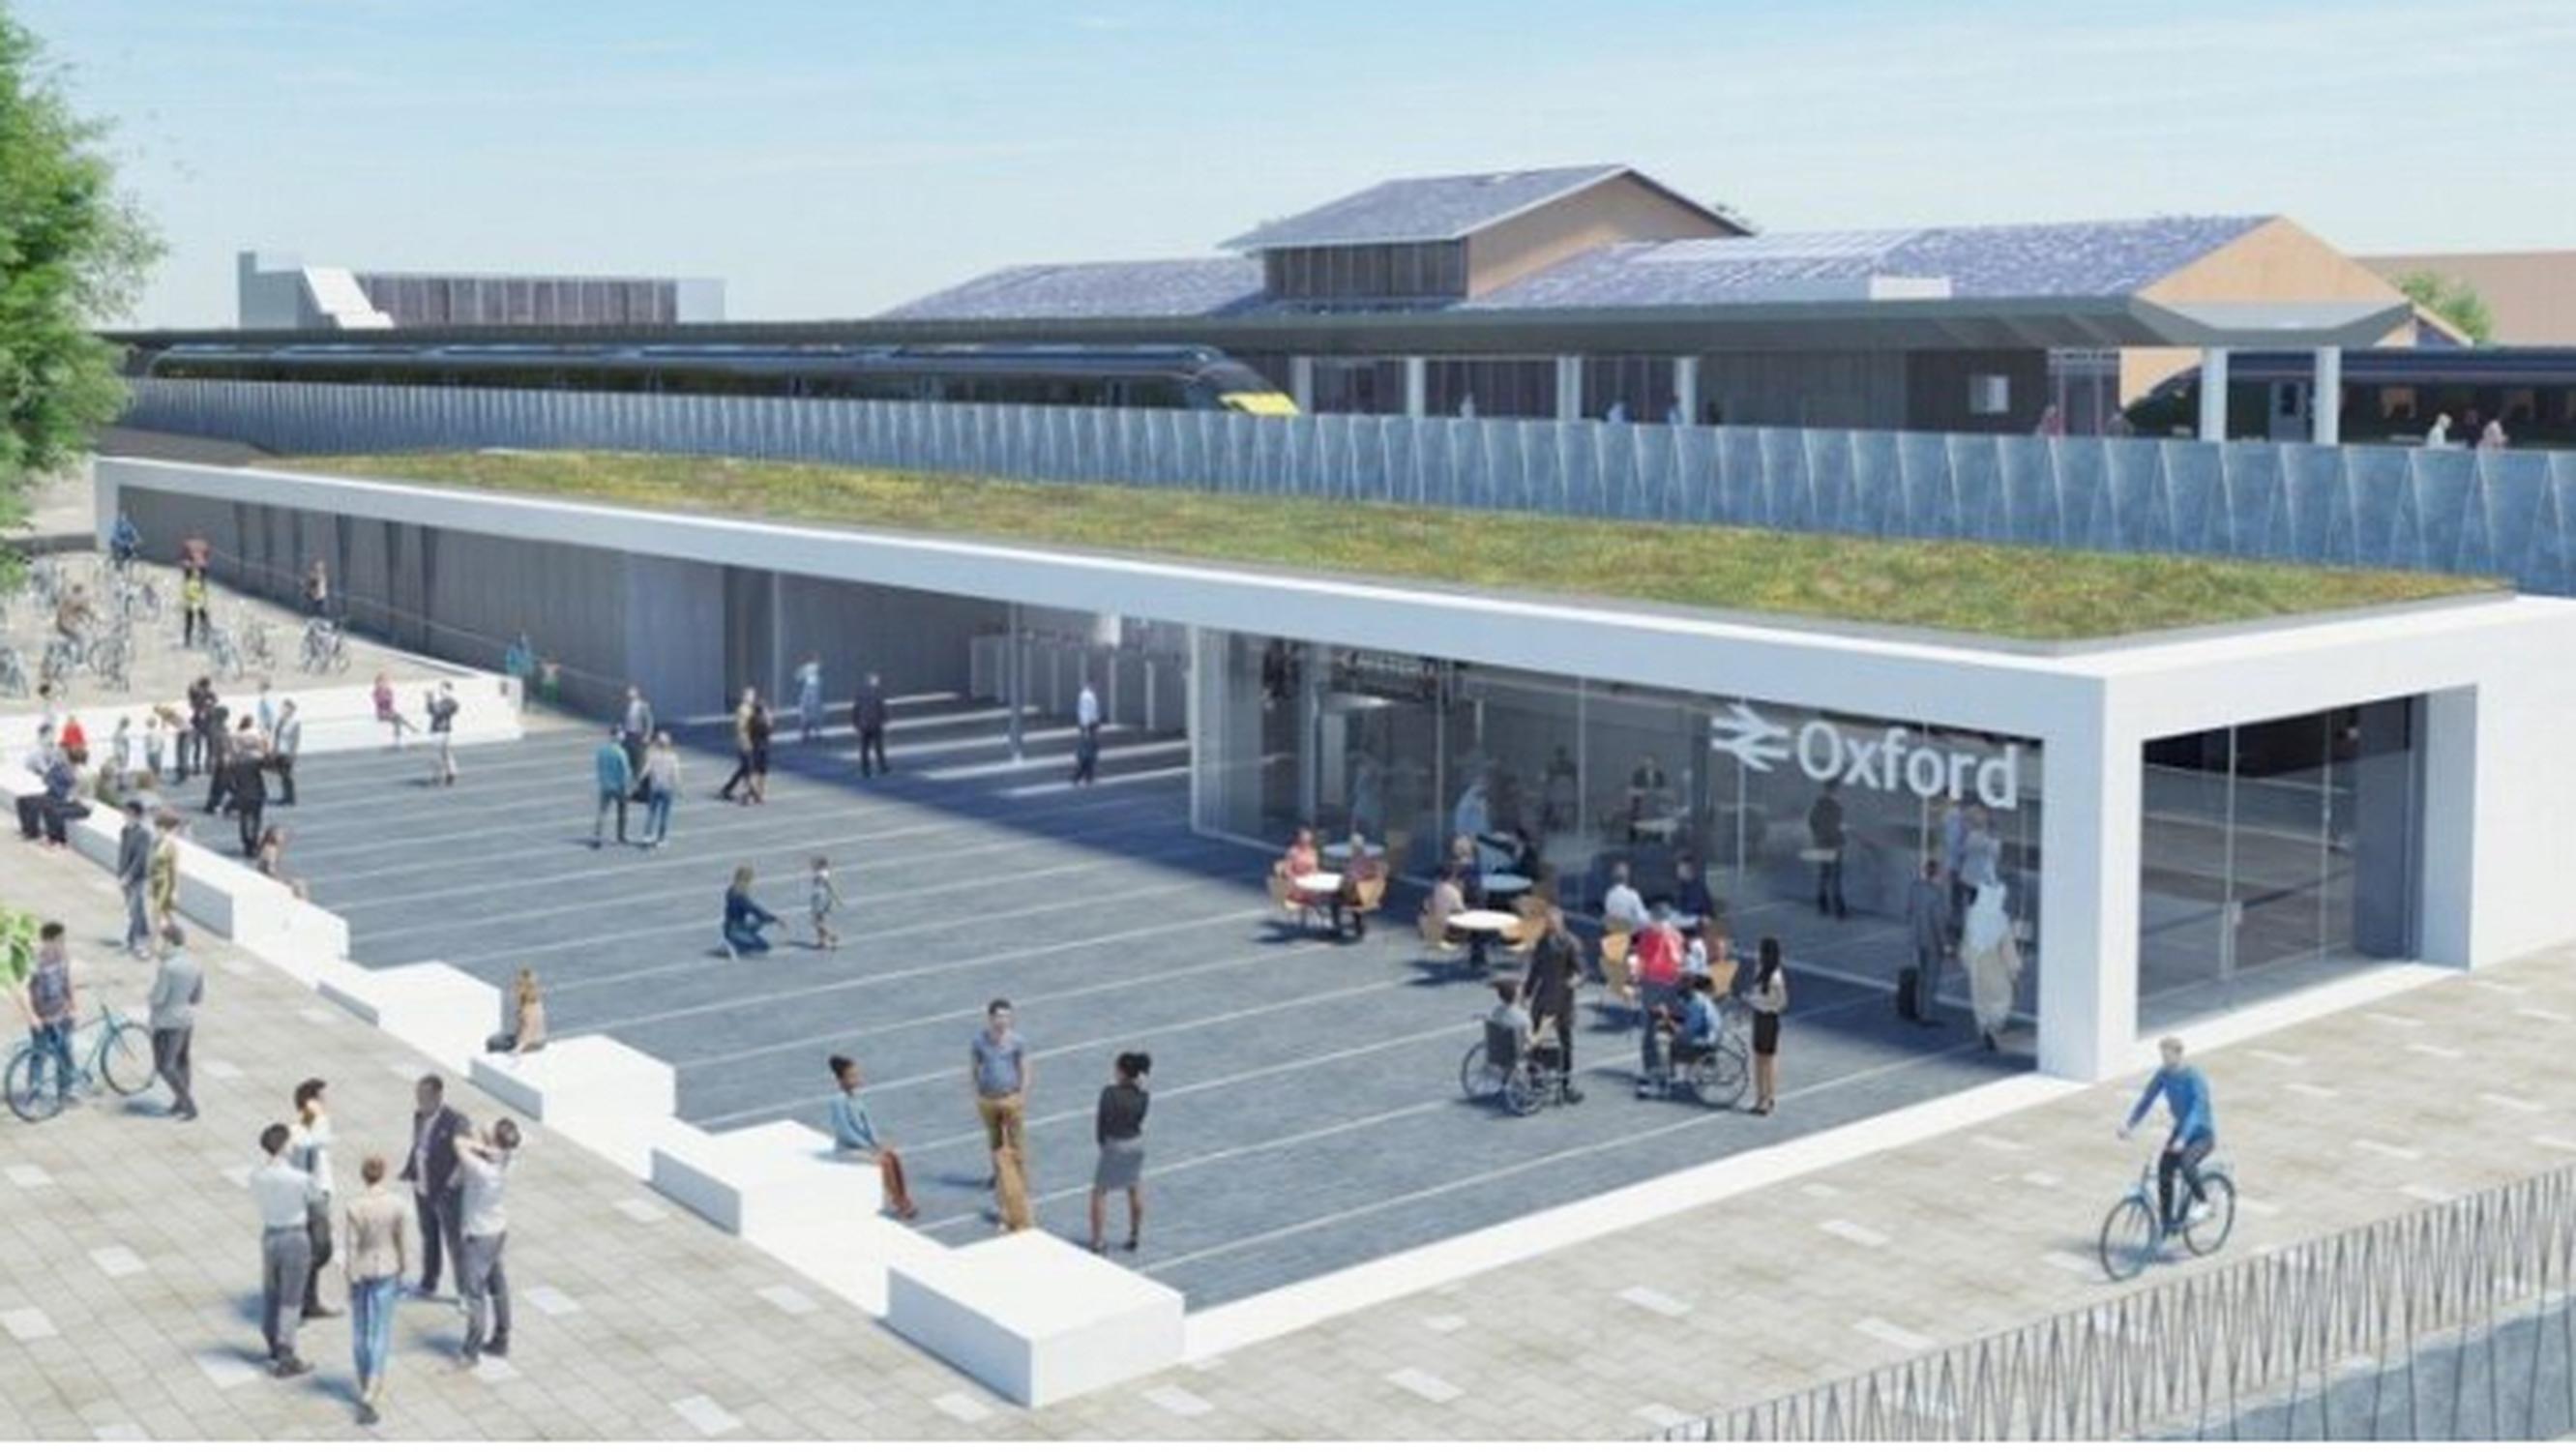 The revamped Oxford station will include a new fully accessible entrance